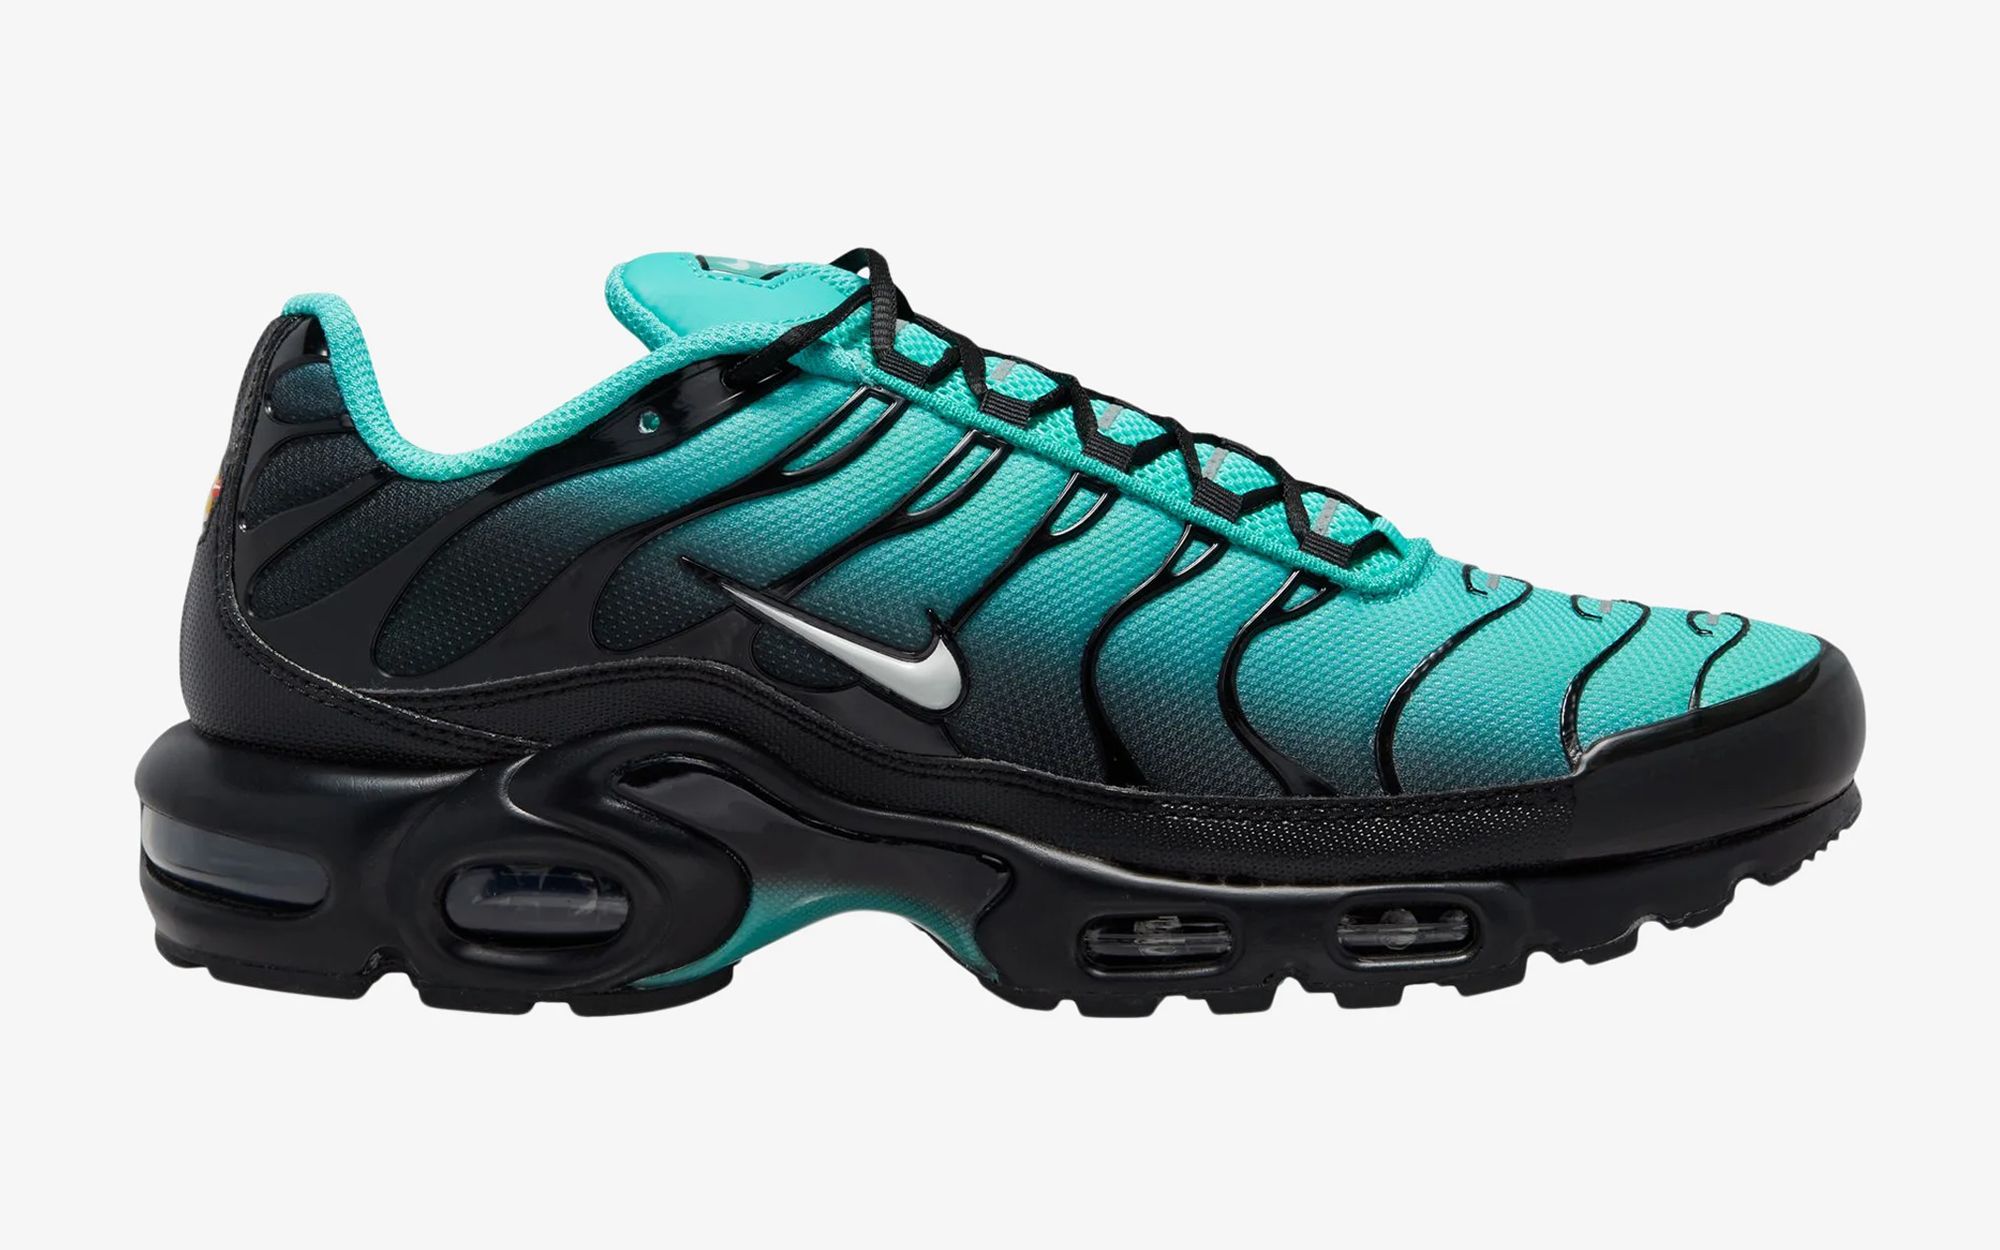 The Nike Air Max Plus Appears in Black and Aqua | House of Heat°